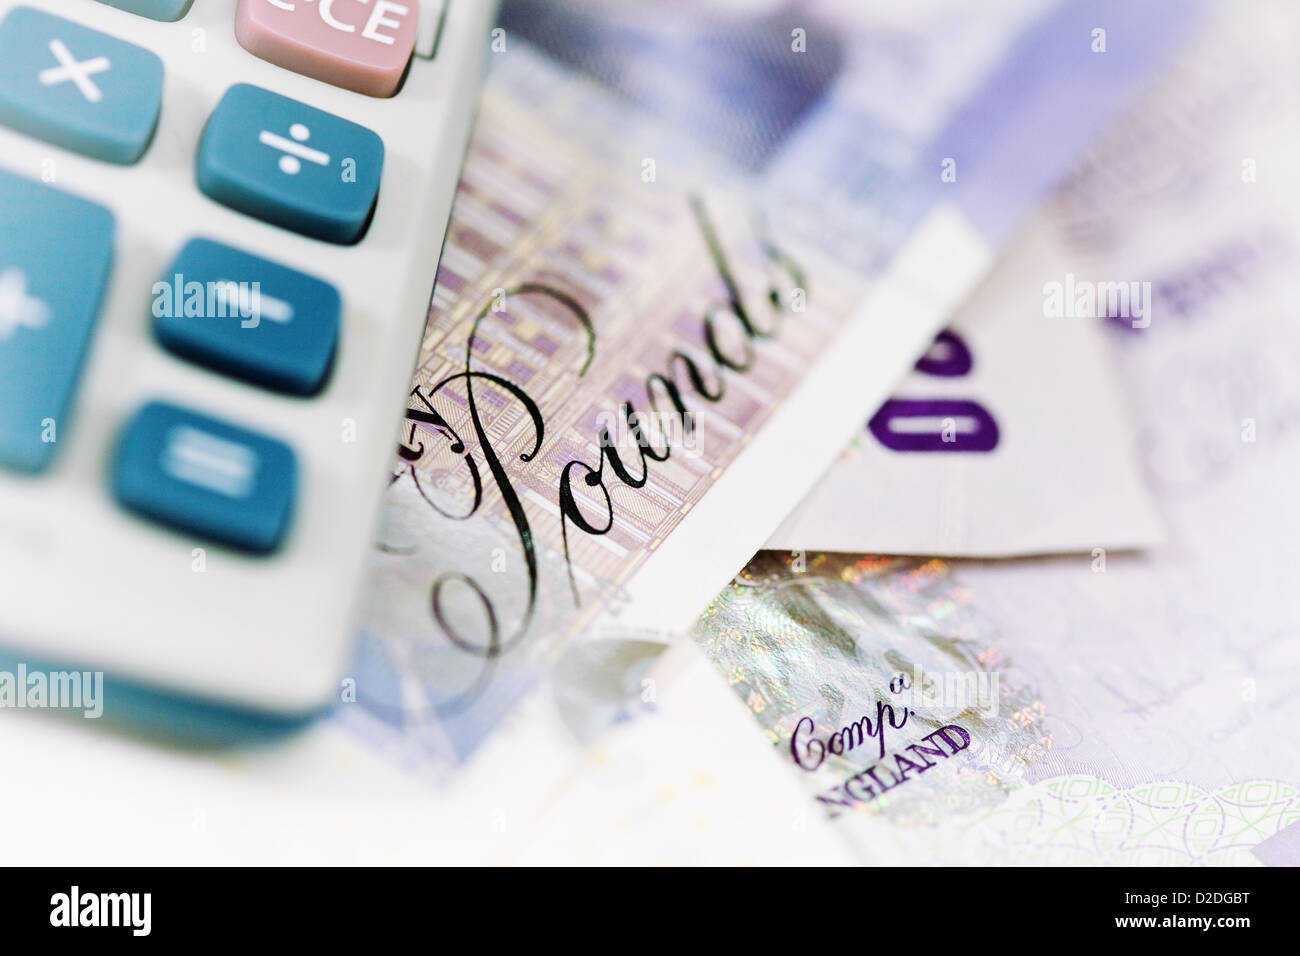 Close-up of a Calculator and British Bank notes. Selective focus and soft white vignette. Stock Photo